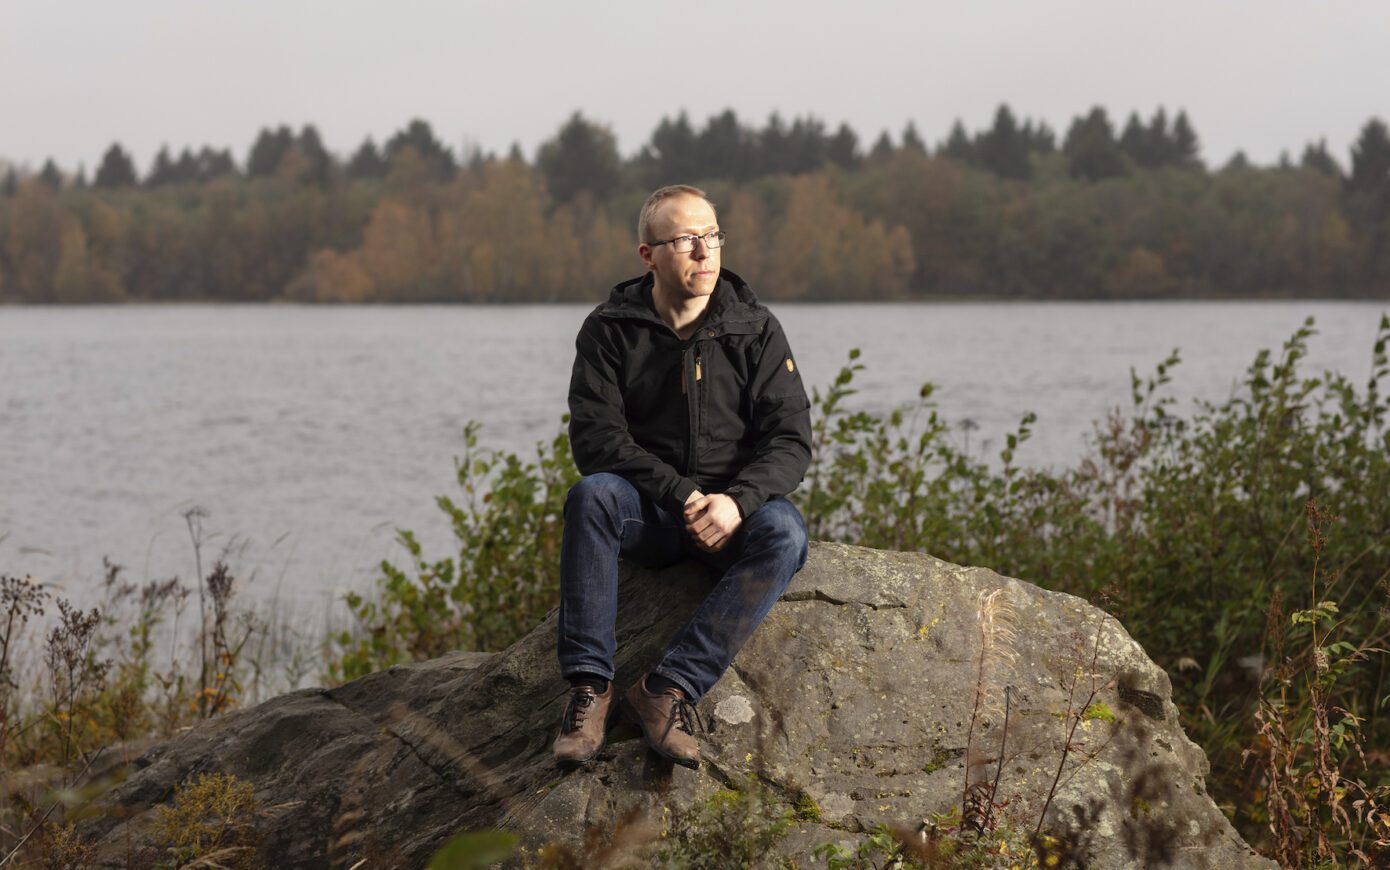 Jouni Rissanen sits on a rock and looks to his right. Behind his back is a grey sea or lake.